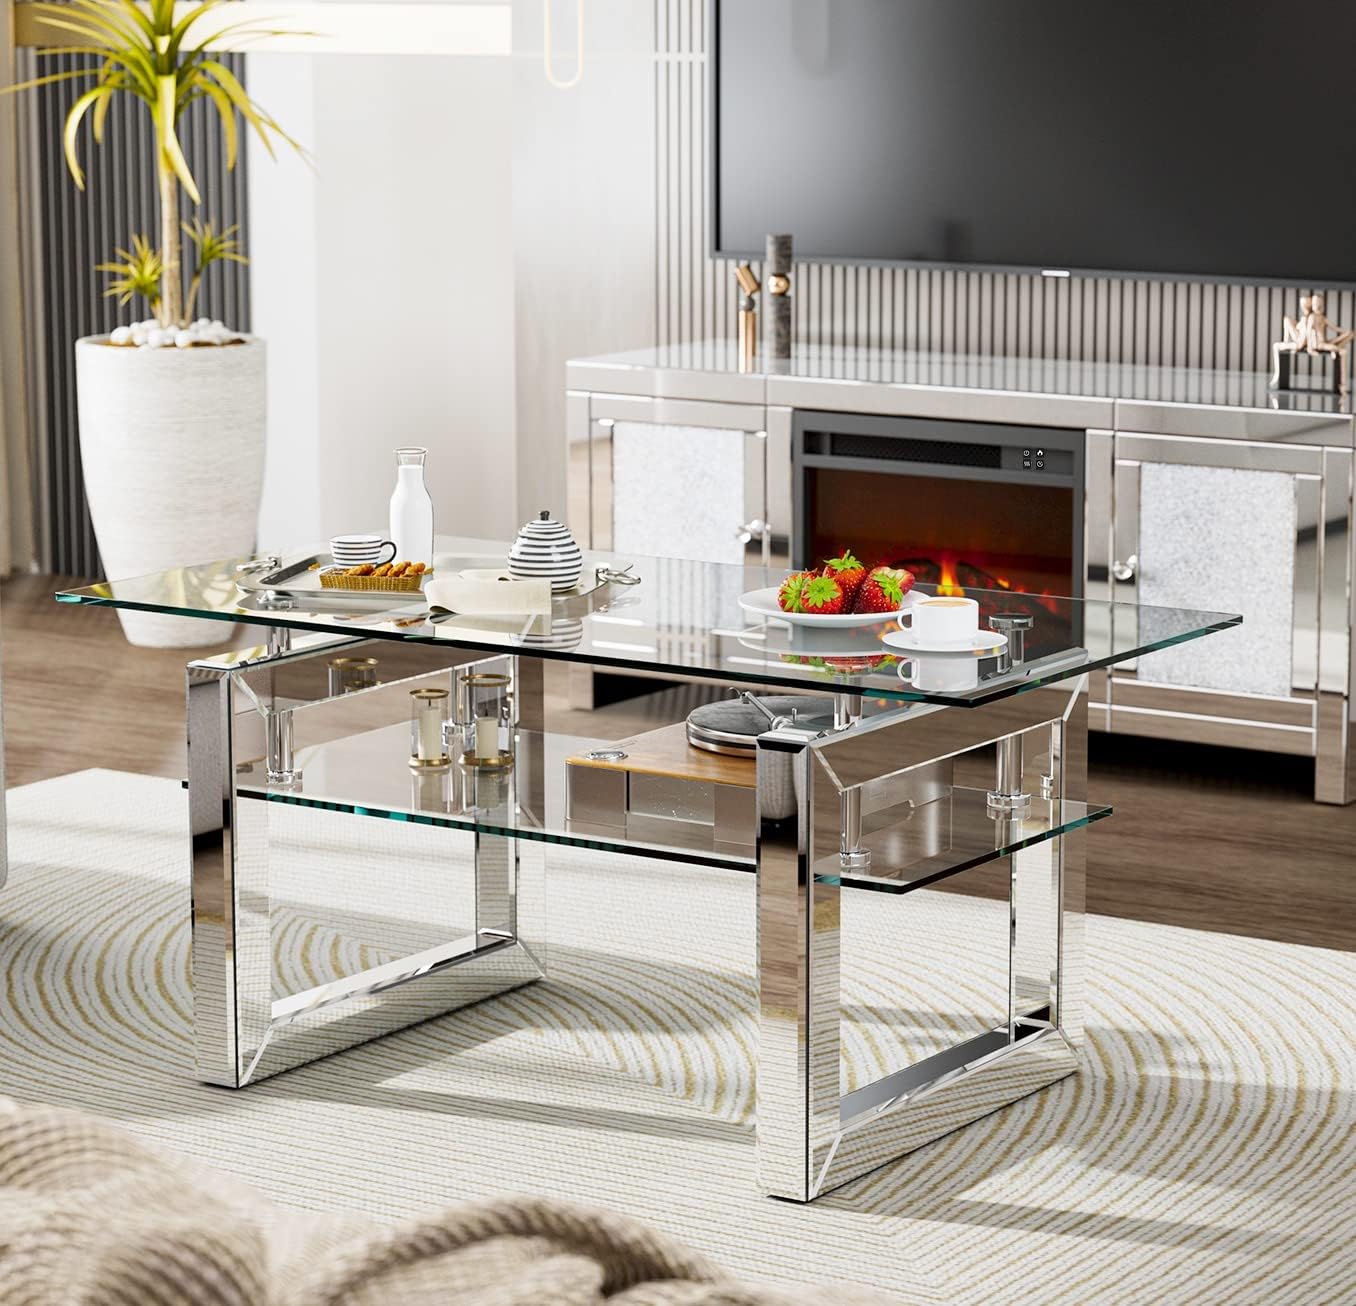 IKIFLY Glass Coffee Table with 2 Tier Glass Boards & Sturdy Metal Legs, Mirrored Clear Rectangle Glass End Table Coffee Tea Table for Home Office